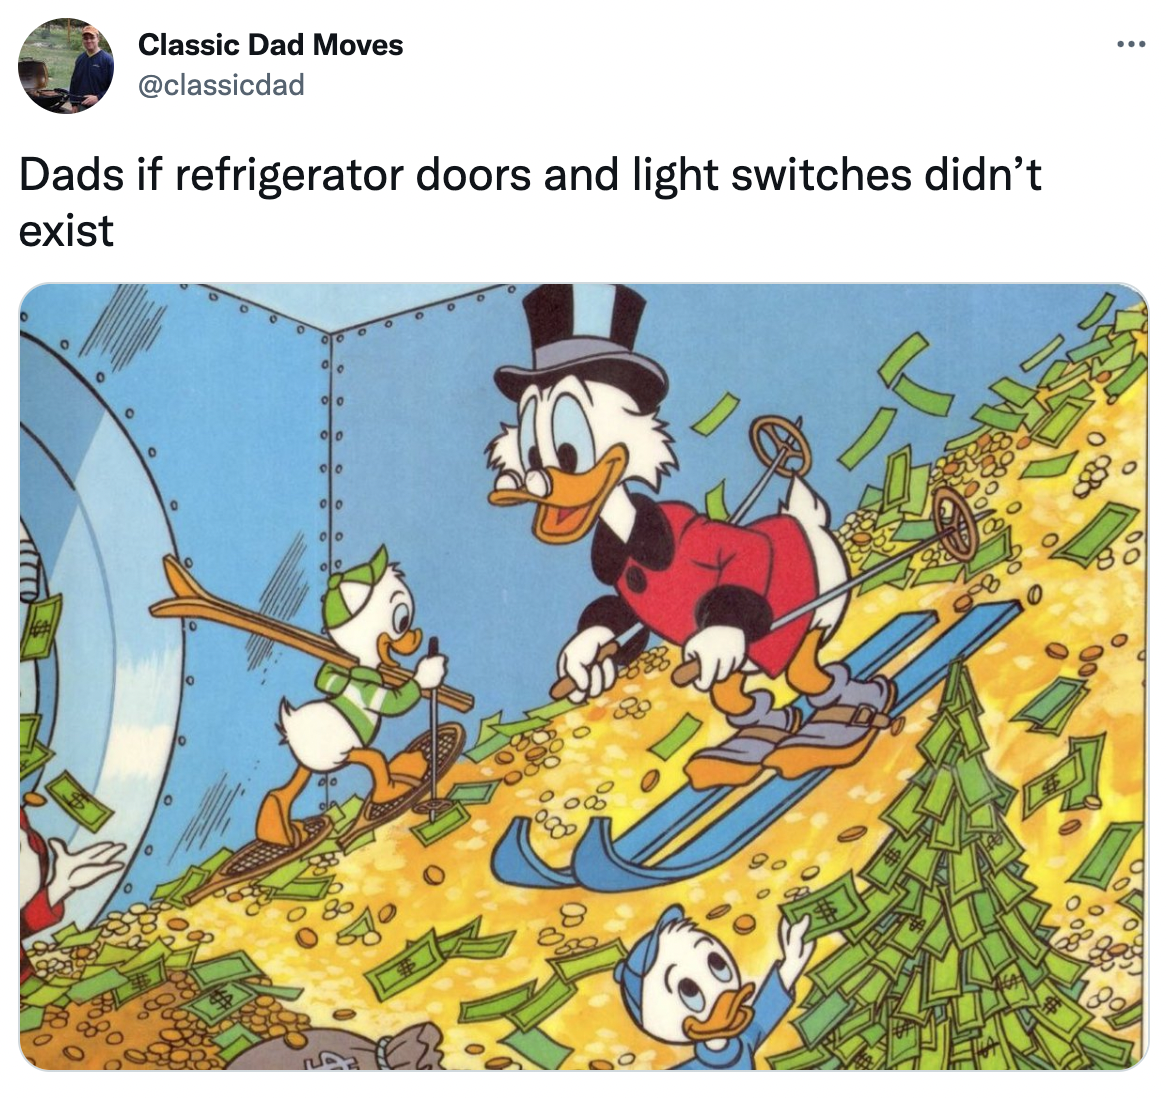 Dank Dad Memes - money scrooge mcduck - Classic Dad Moves Dads if refrigerator doors and light switches didn't exist